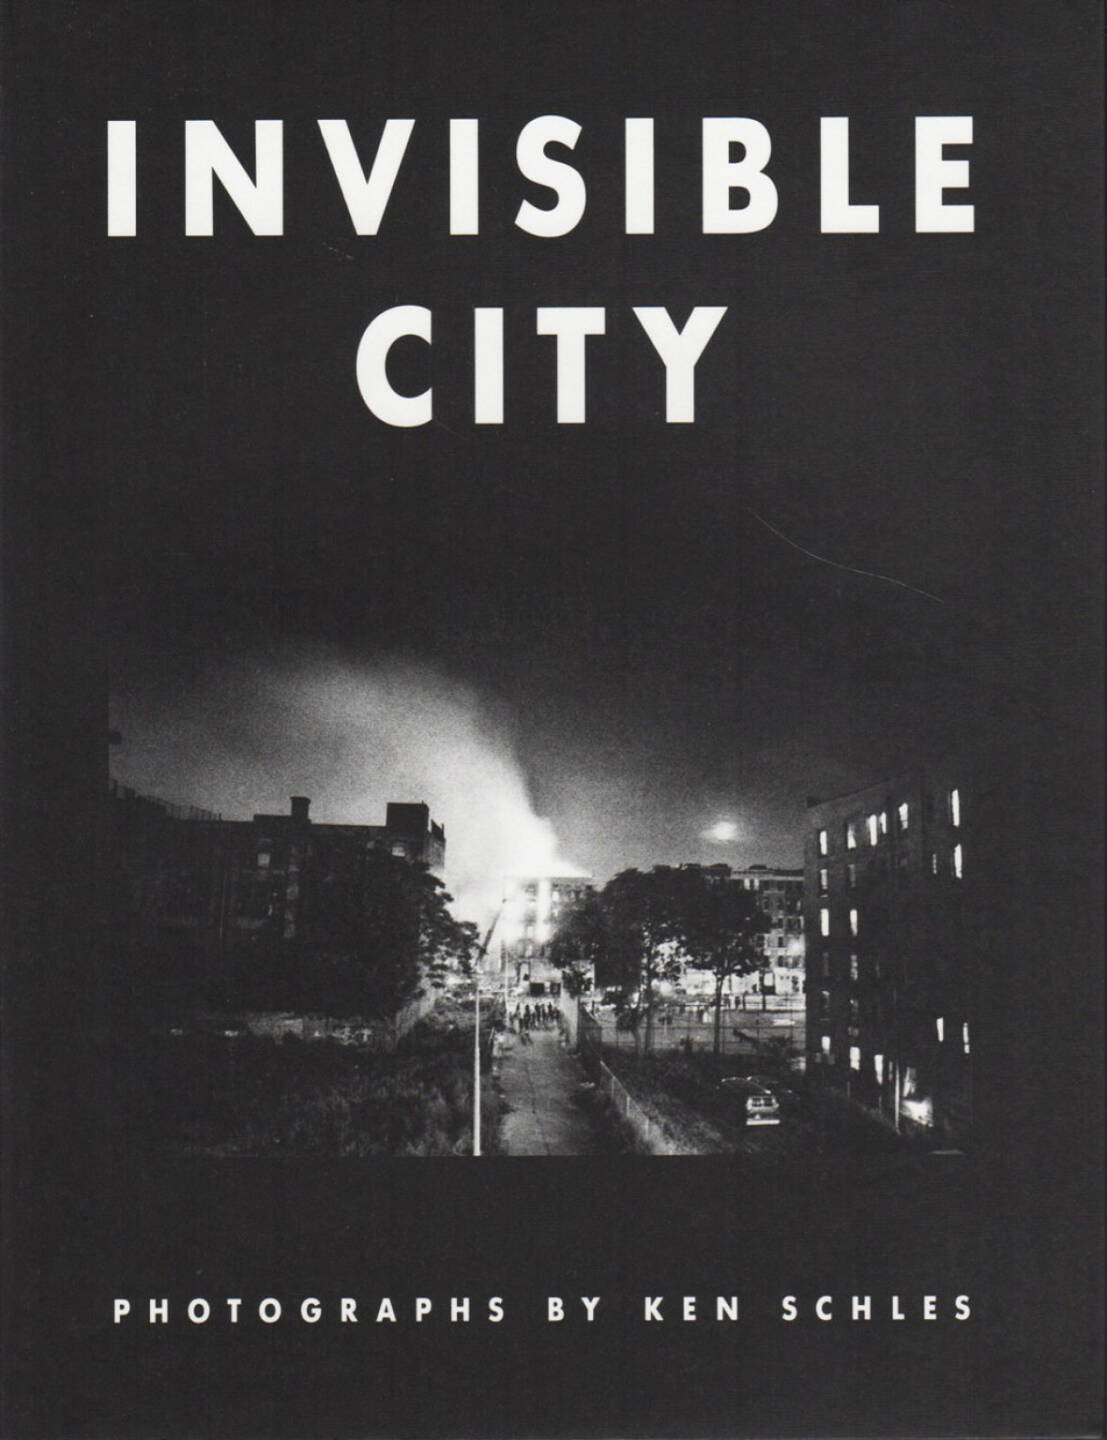 Ken Schles - Invisible City, Steidl 2014, Cover - http://josefchladek.com/book/ken_schles_-_invisible_city_1